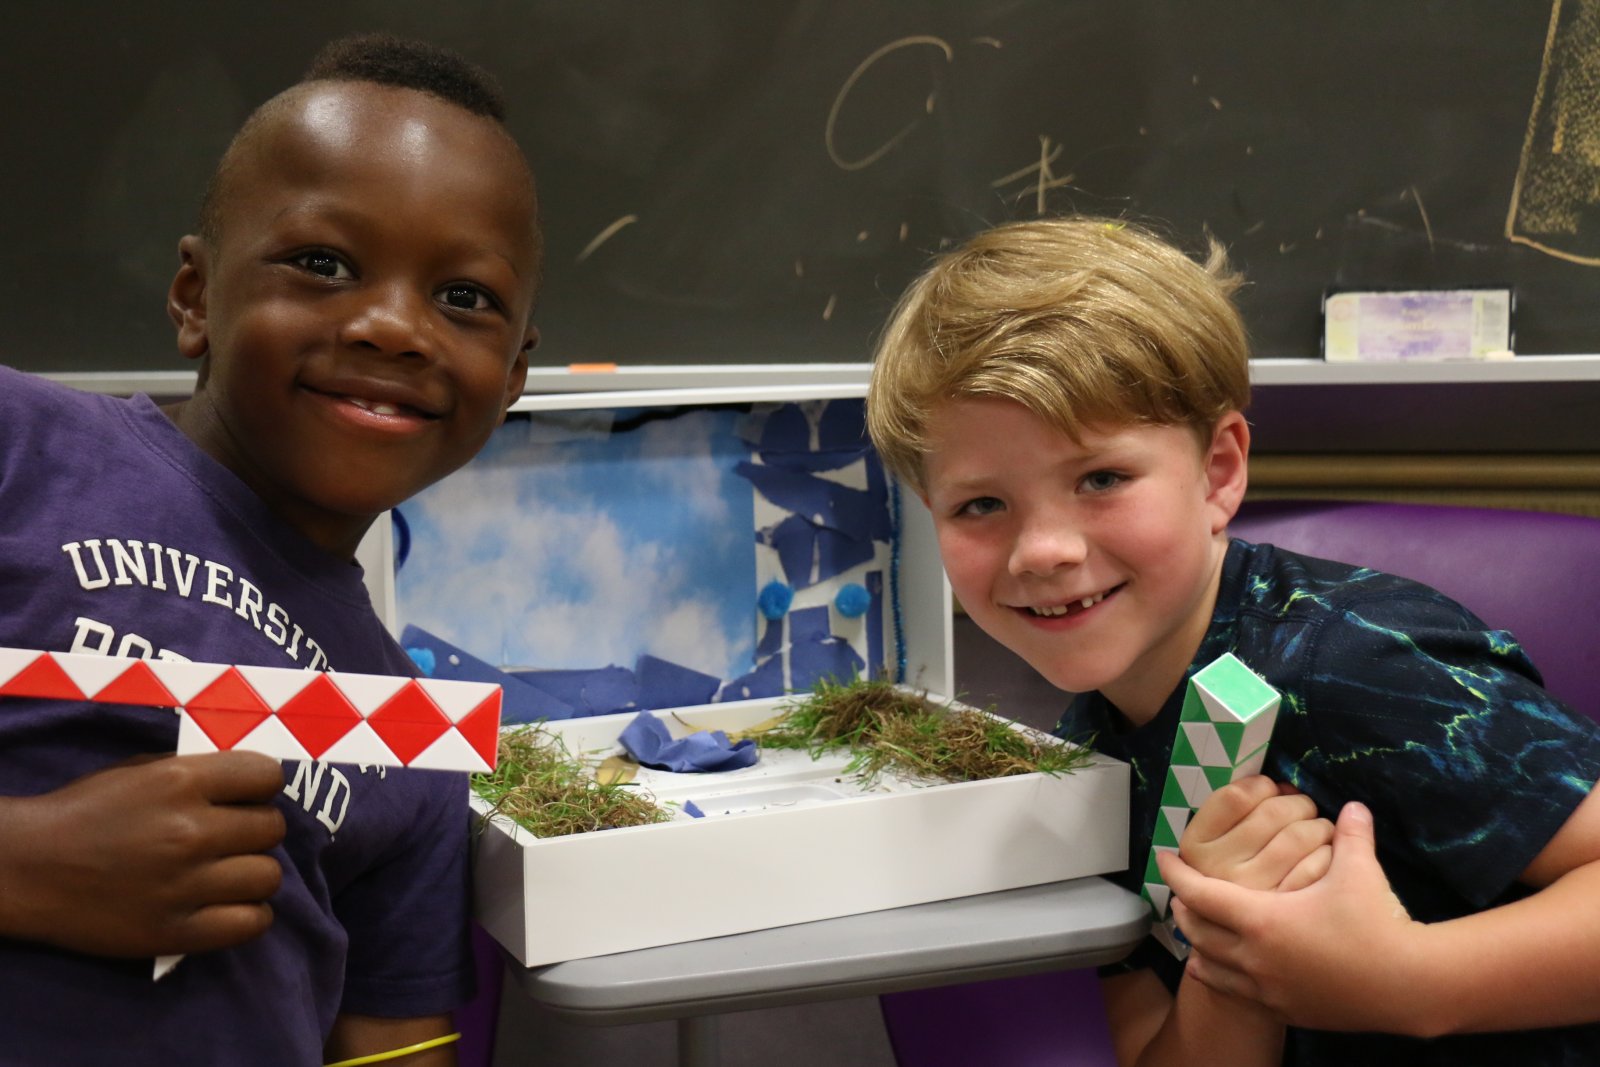 Two kids, white and black, happily showing off their class project